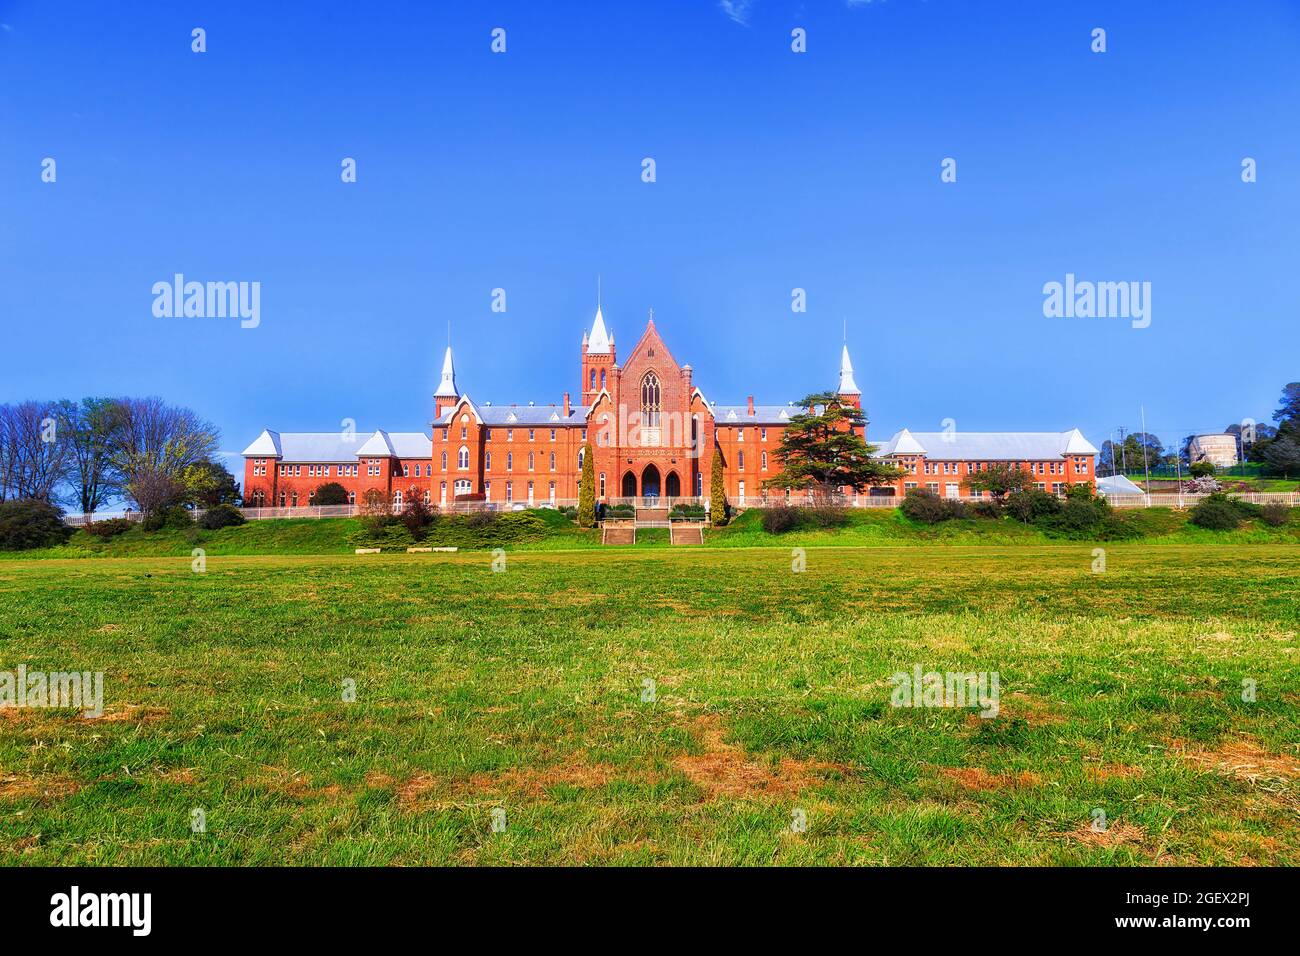 Red brick facade and main building of local high-school college in rural town of Australia - Bathurst. Stock Photo